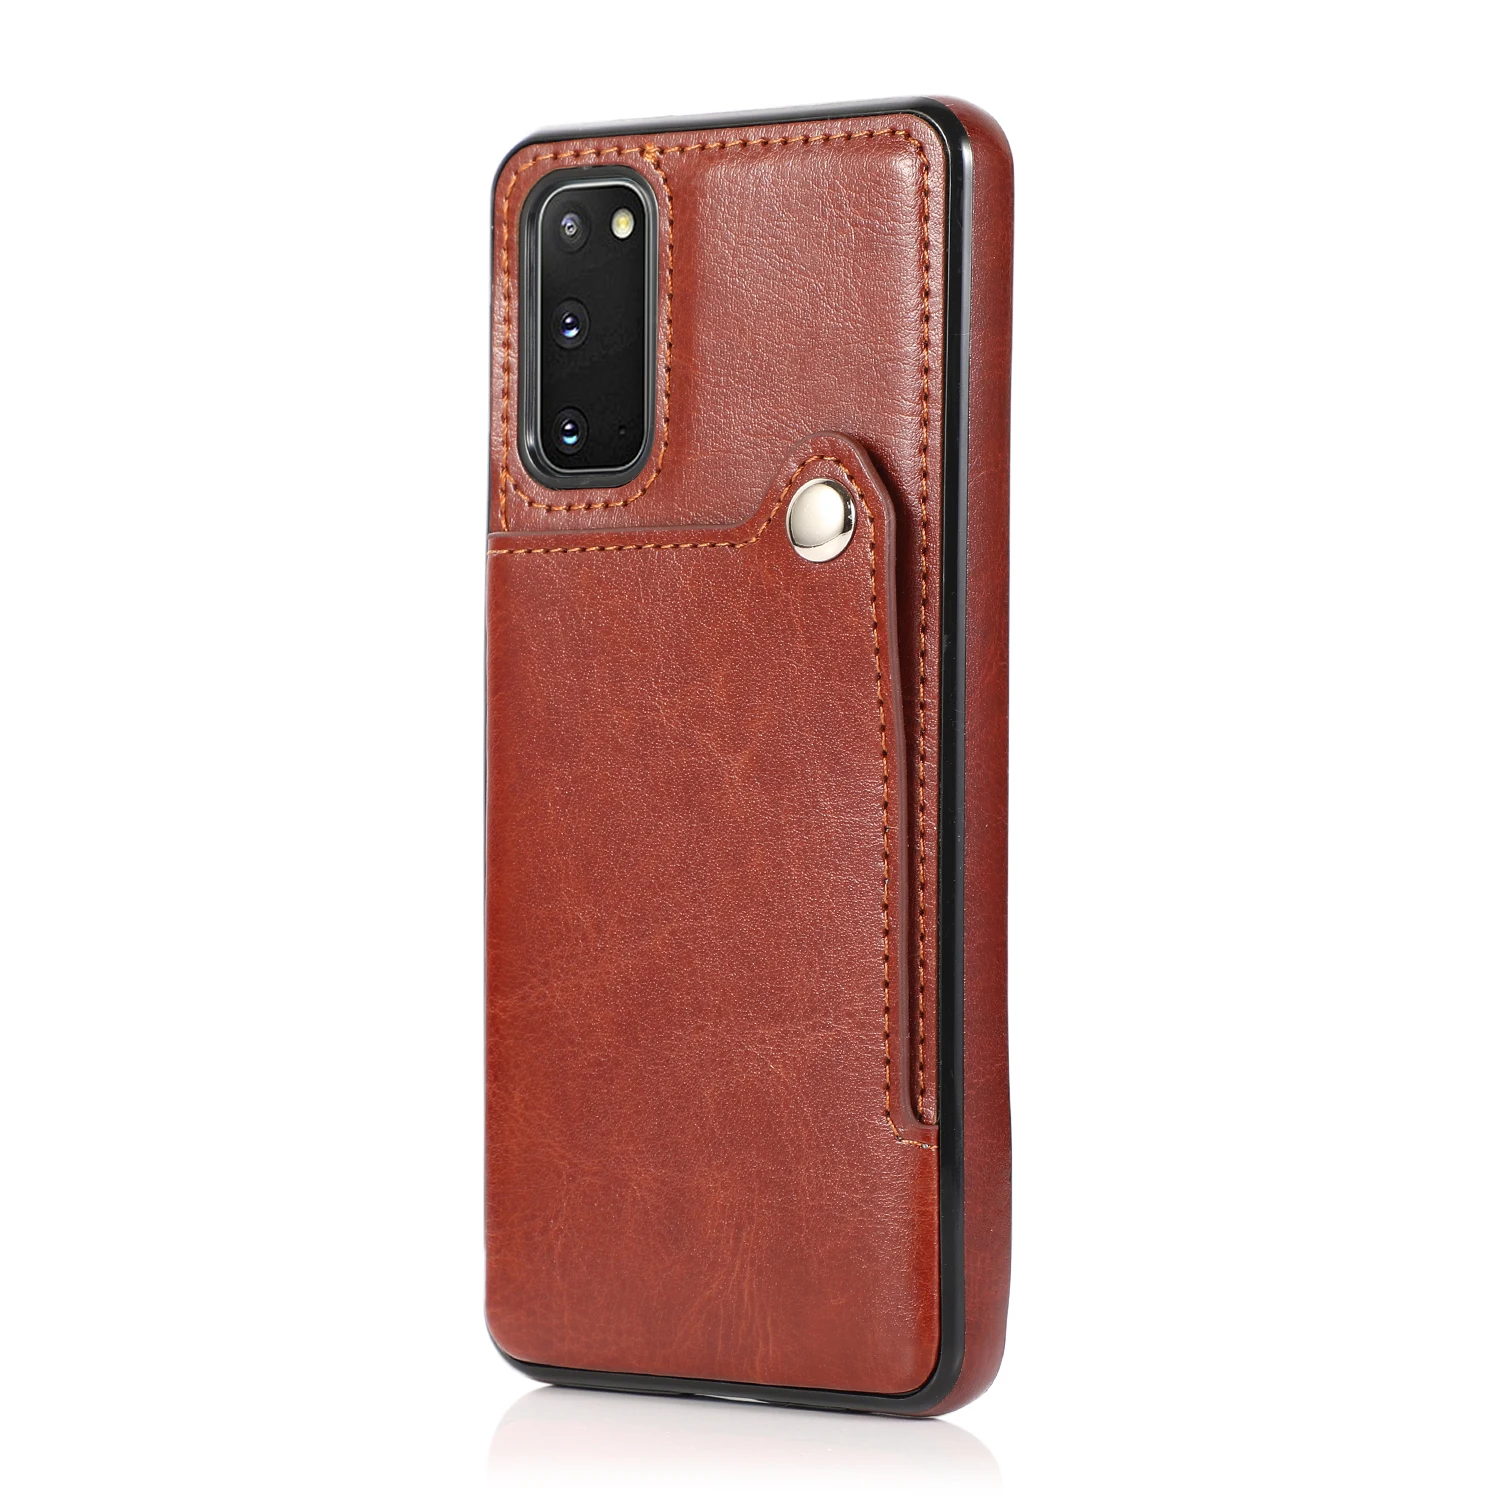 Pure Color Shockproof Wallet Leather Back Case For Samsung Galaxy S21 Plus Buy For Samsung S21 Wallet Case For Samsung Phone Case S21 Ultra Case Product On Alibaba Com